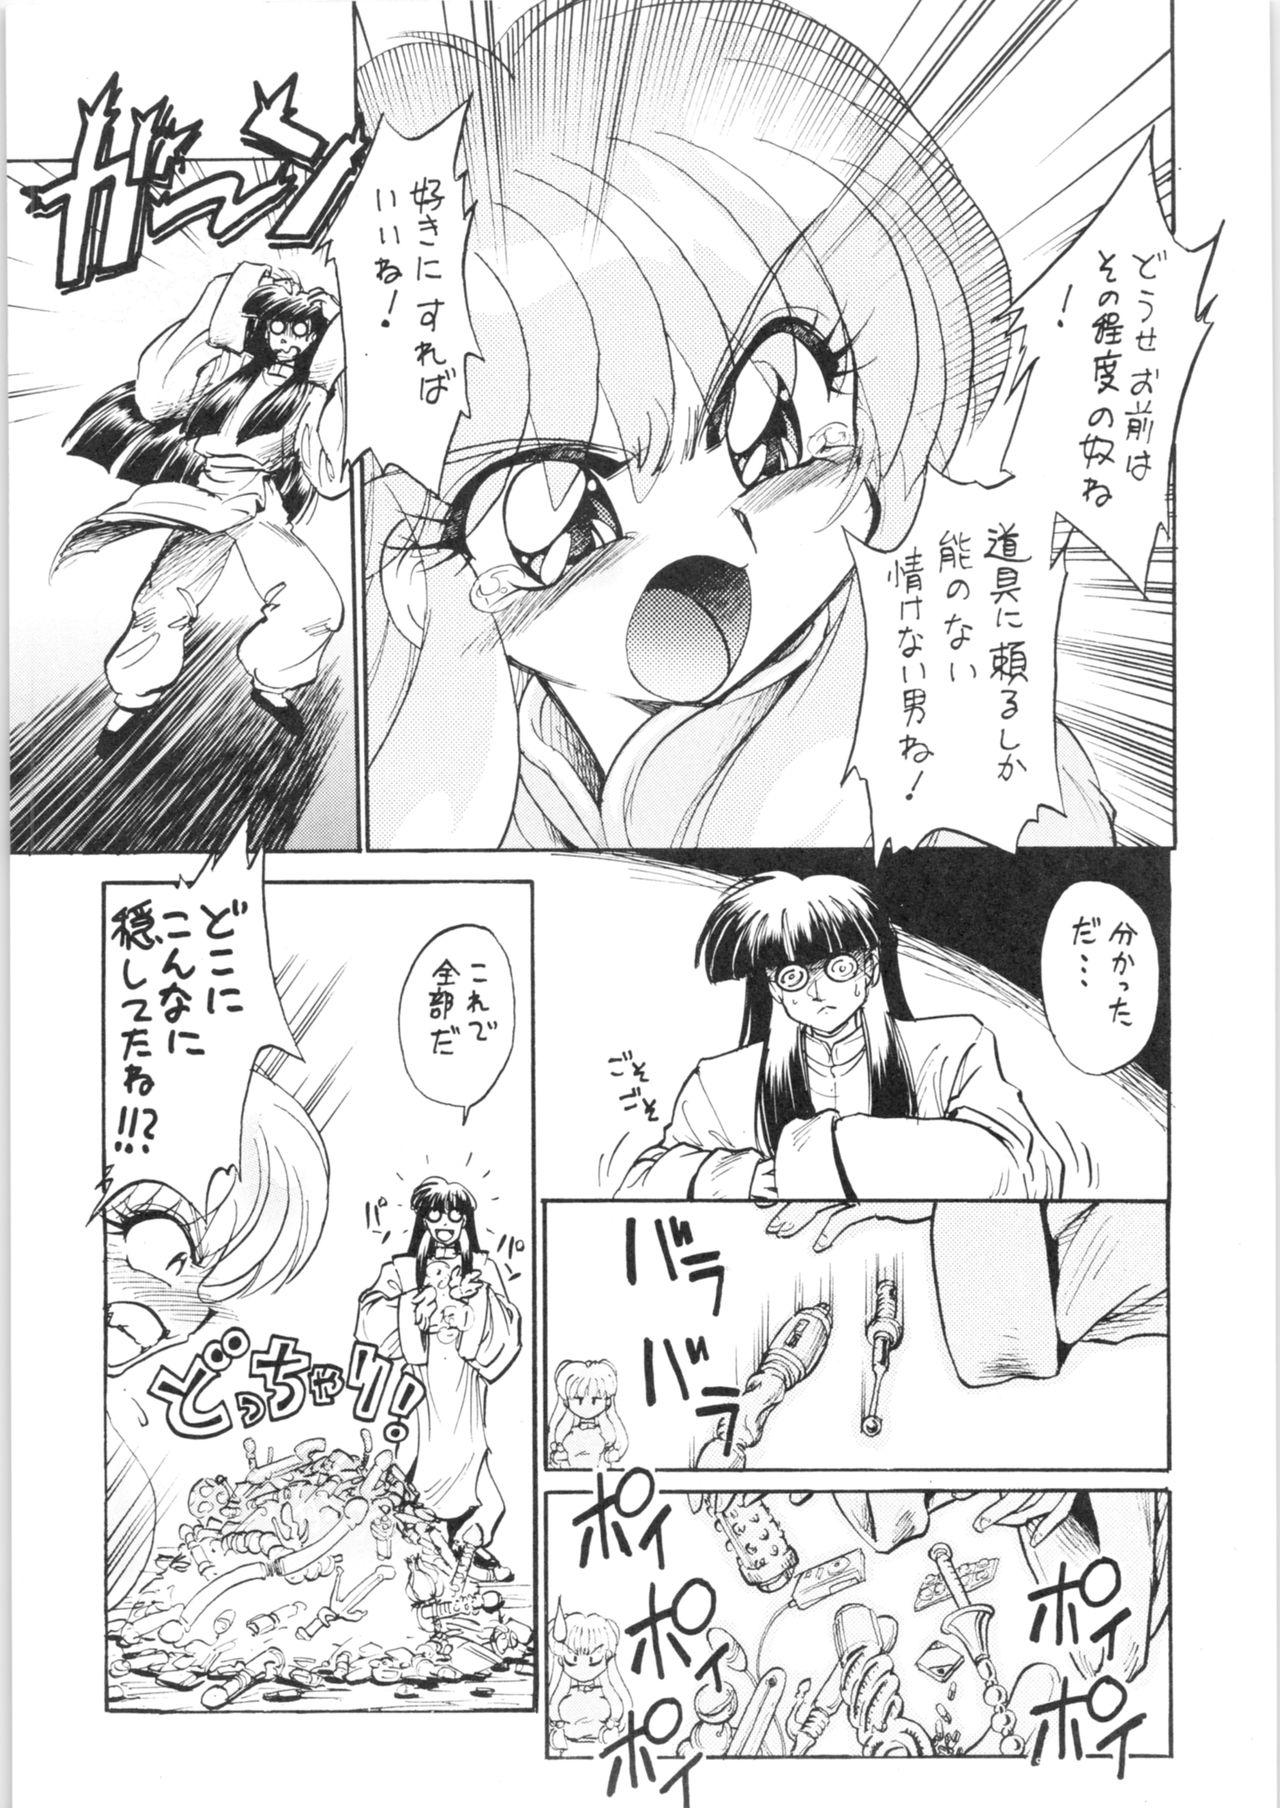 First Annojou - Ranma 12 Spread - Page 10